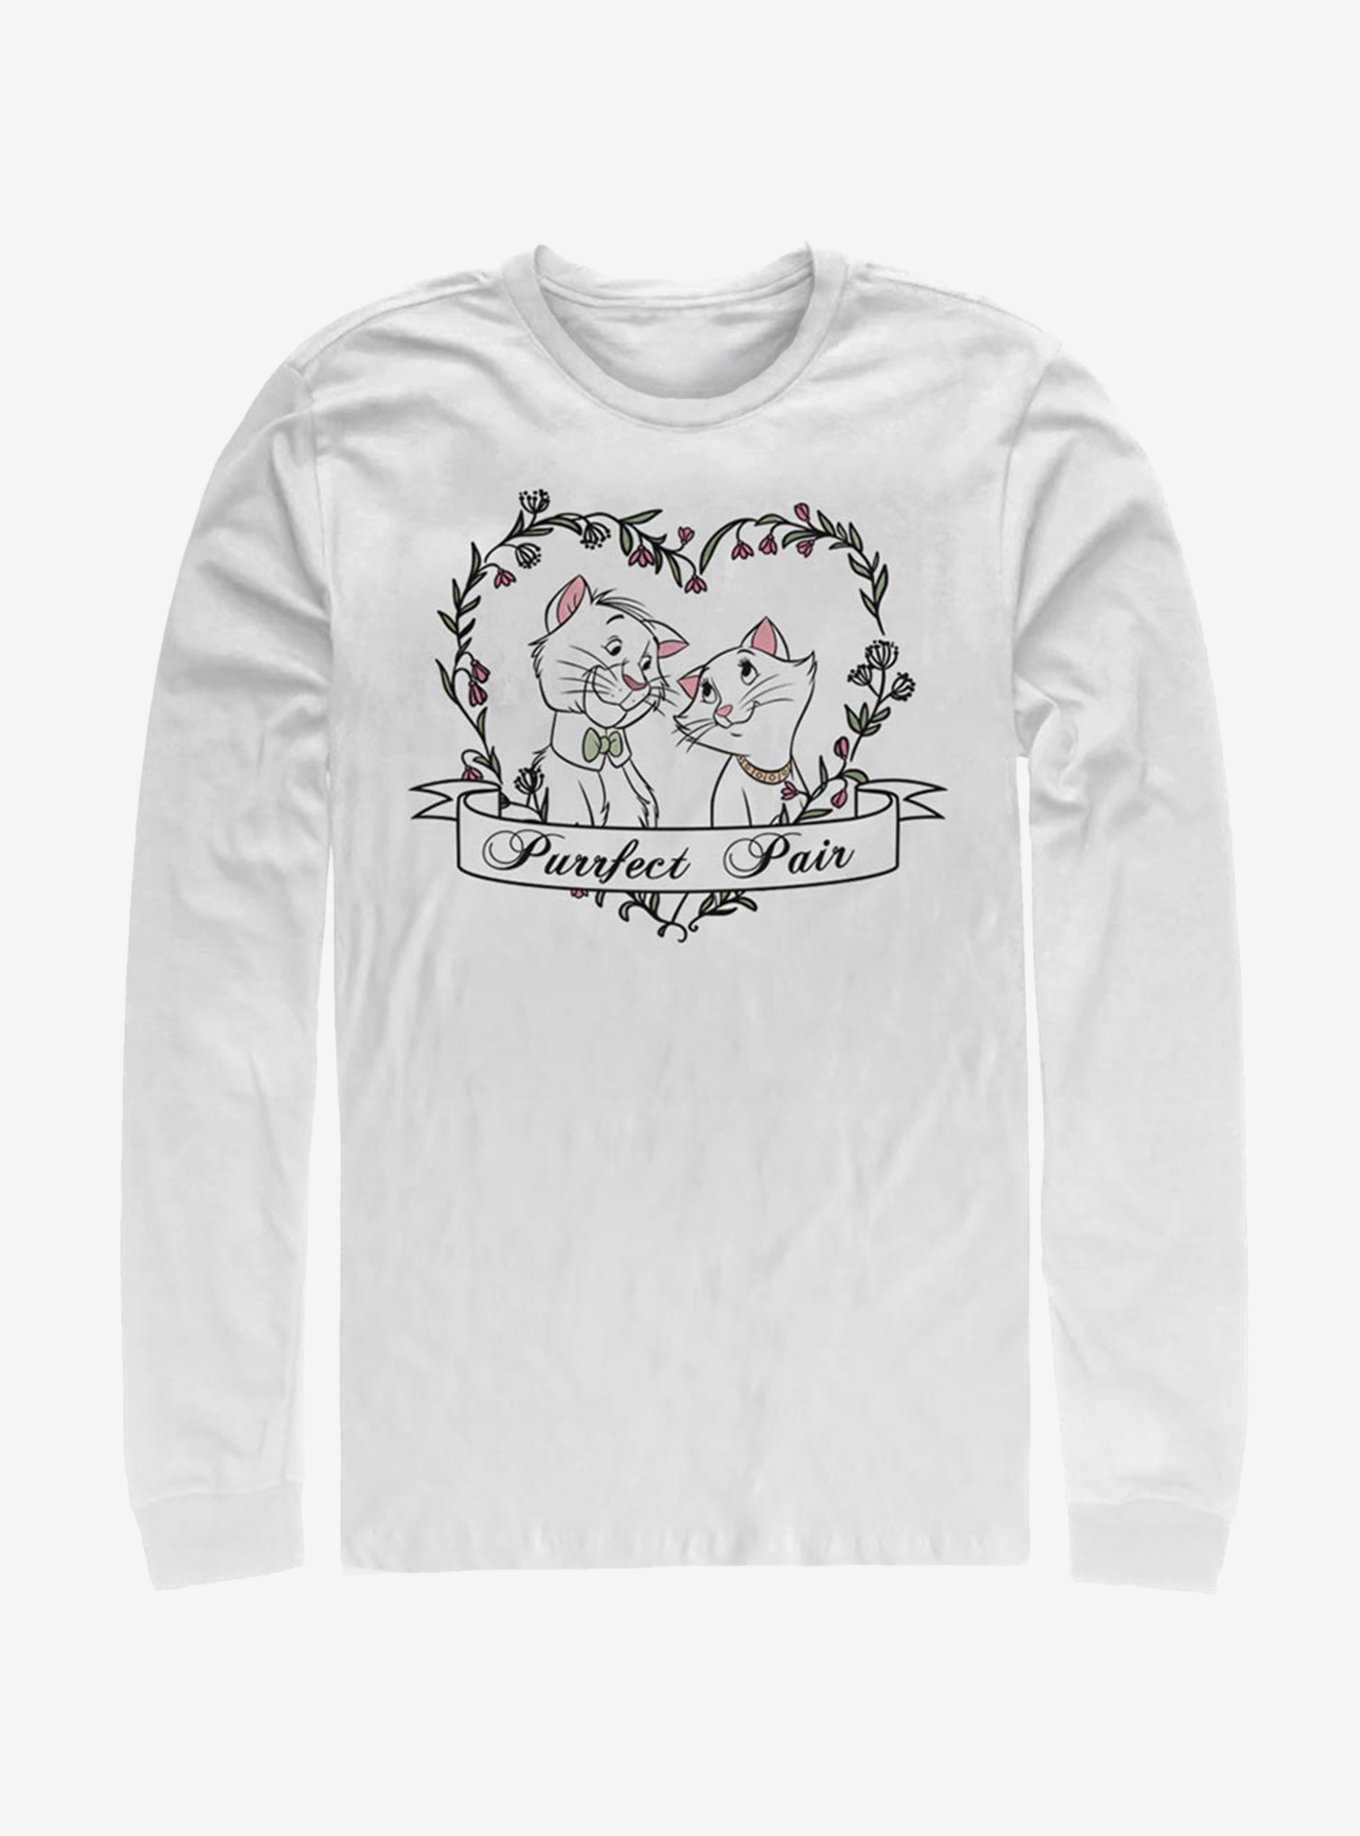 Disney The Aristocats Duchess And O'Malley Purrfect Long-Sleeve T-Shirt, , hi-res